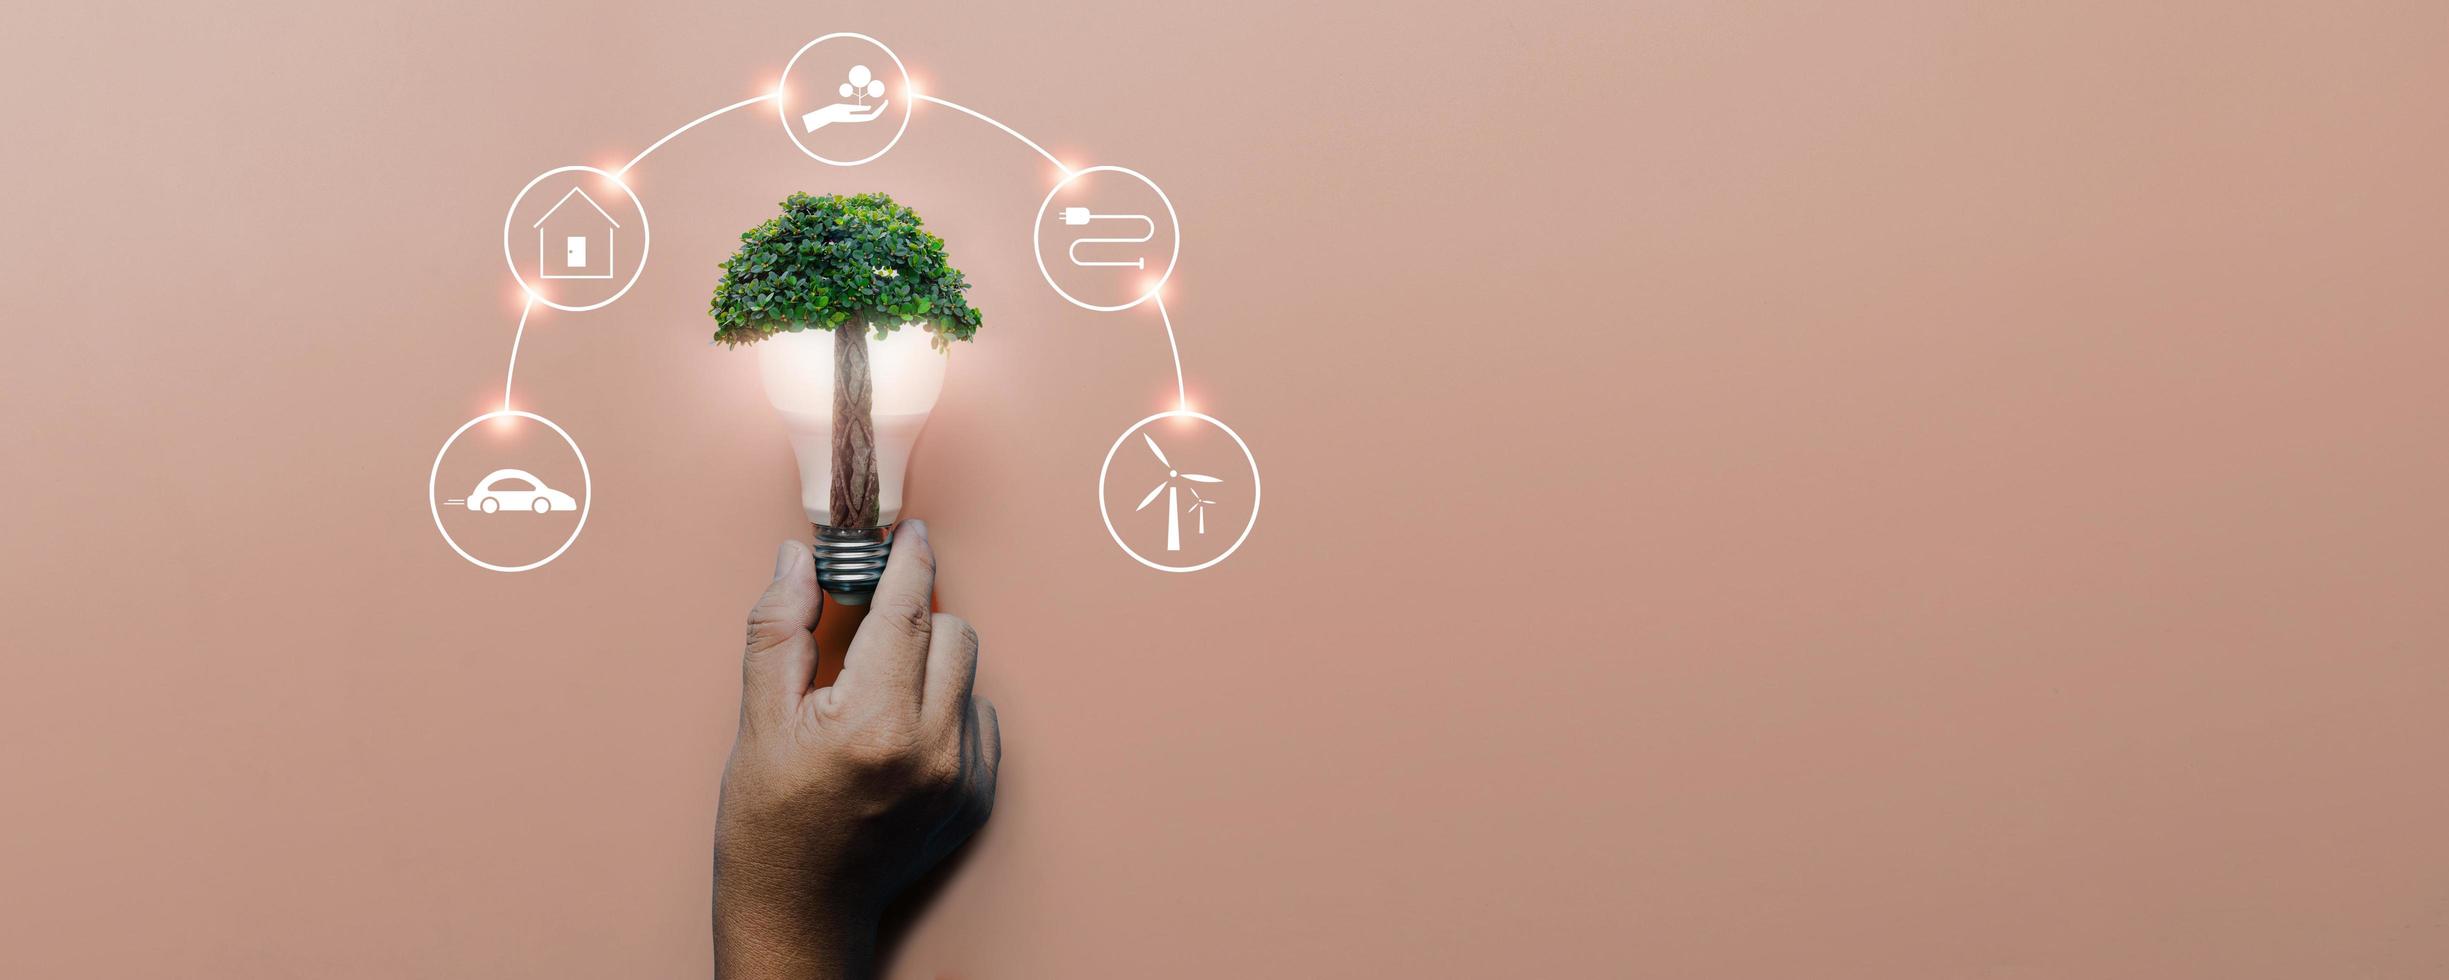 Hand holding light bulb with big tree on pink background with icons energy sources for renewable, solar cells energy , sustainable development. Ecology and environment concept. photo